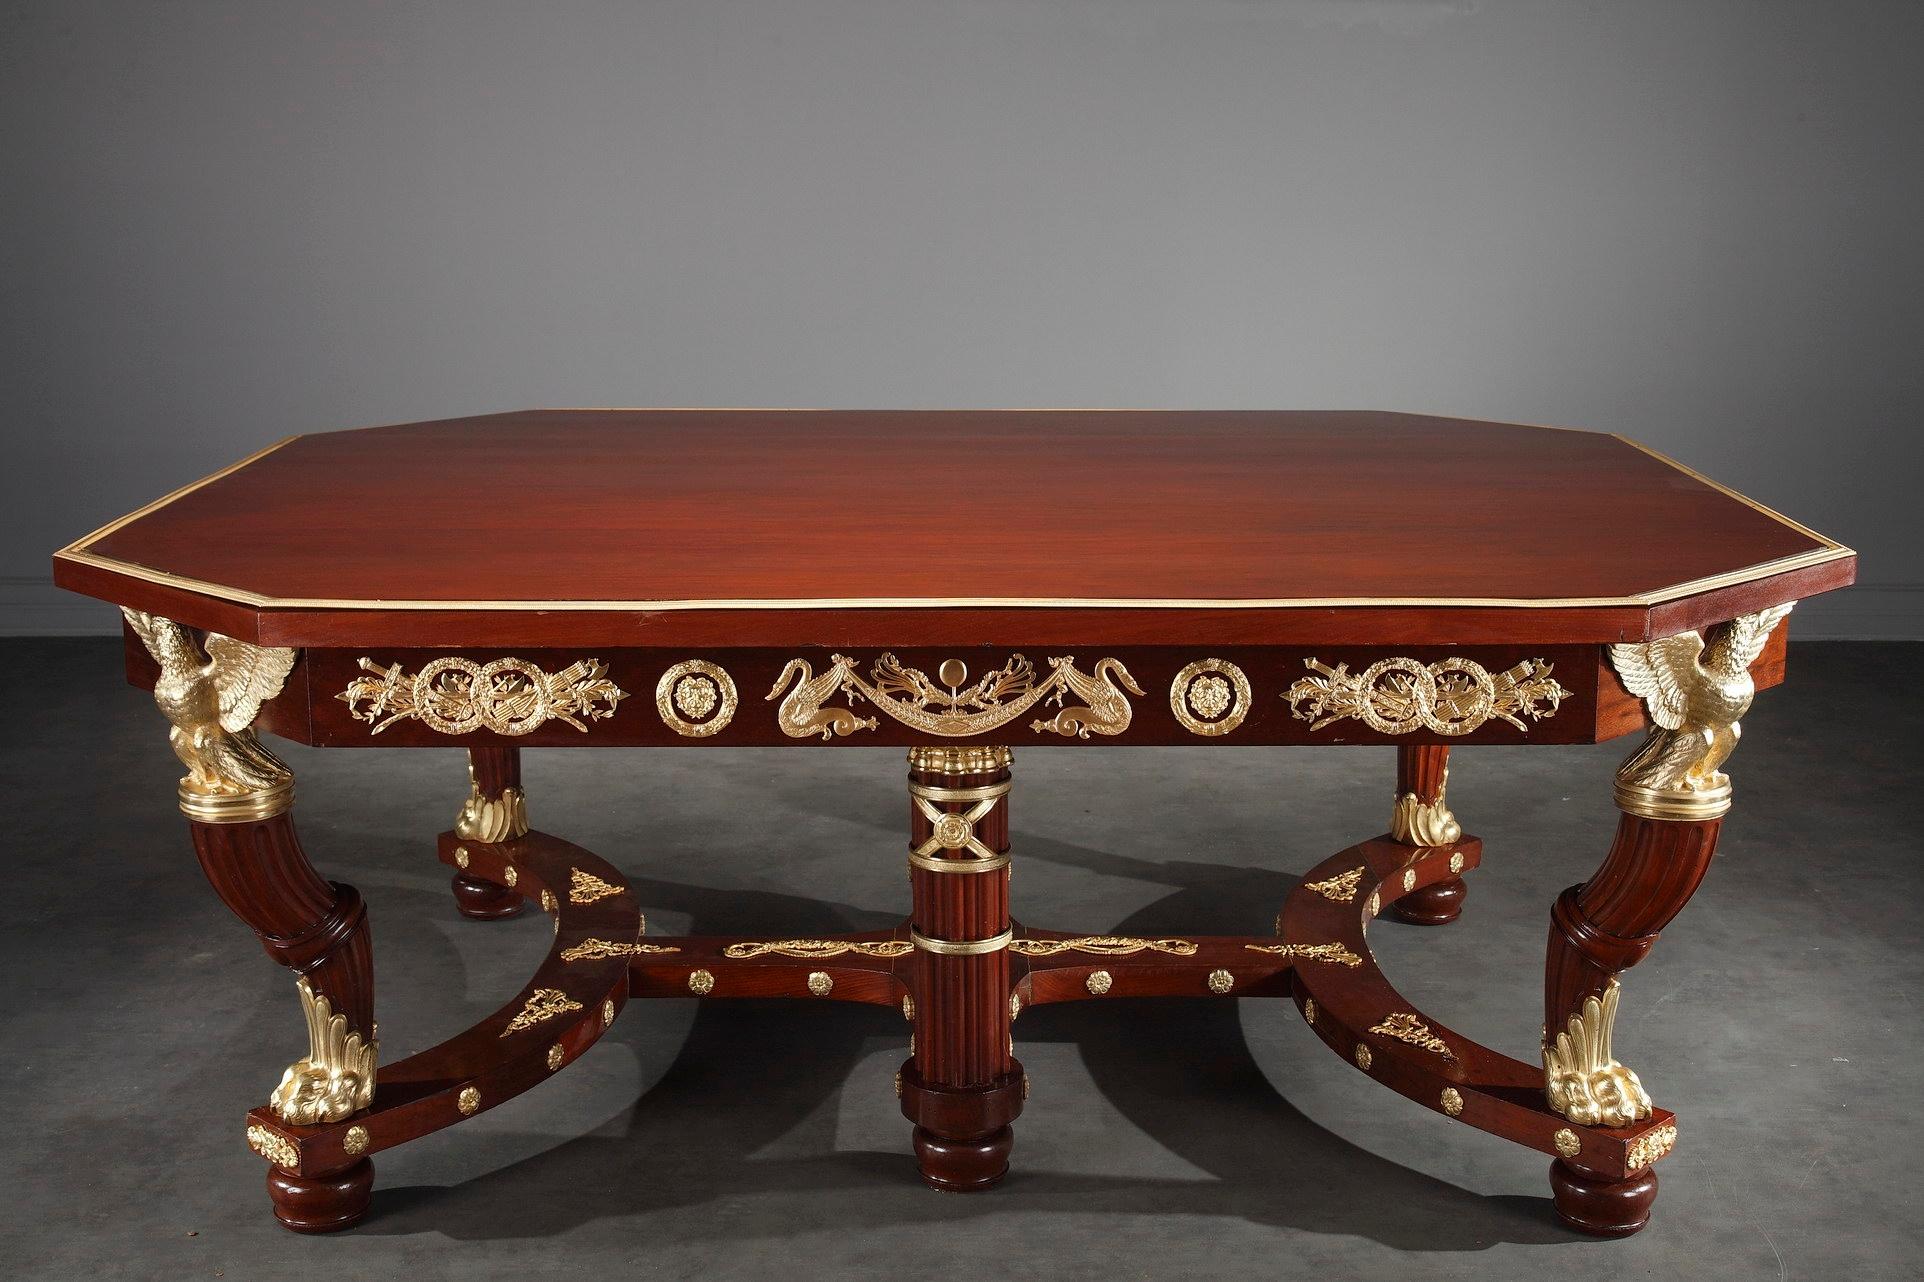 This 13-piece Napoleon III dining room suite crafted of mahogany and mahogany veneer, boasts intricate ormolu bronze decoration in Empire style. The suite features twelve chairs and a large dining table.

The octagonal table has a rich gilt and